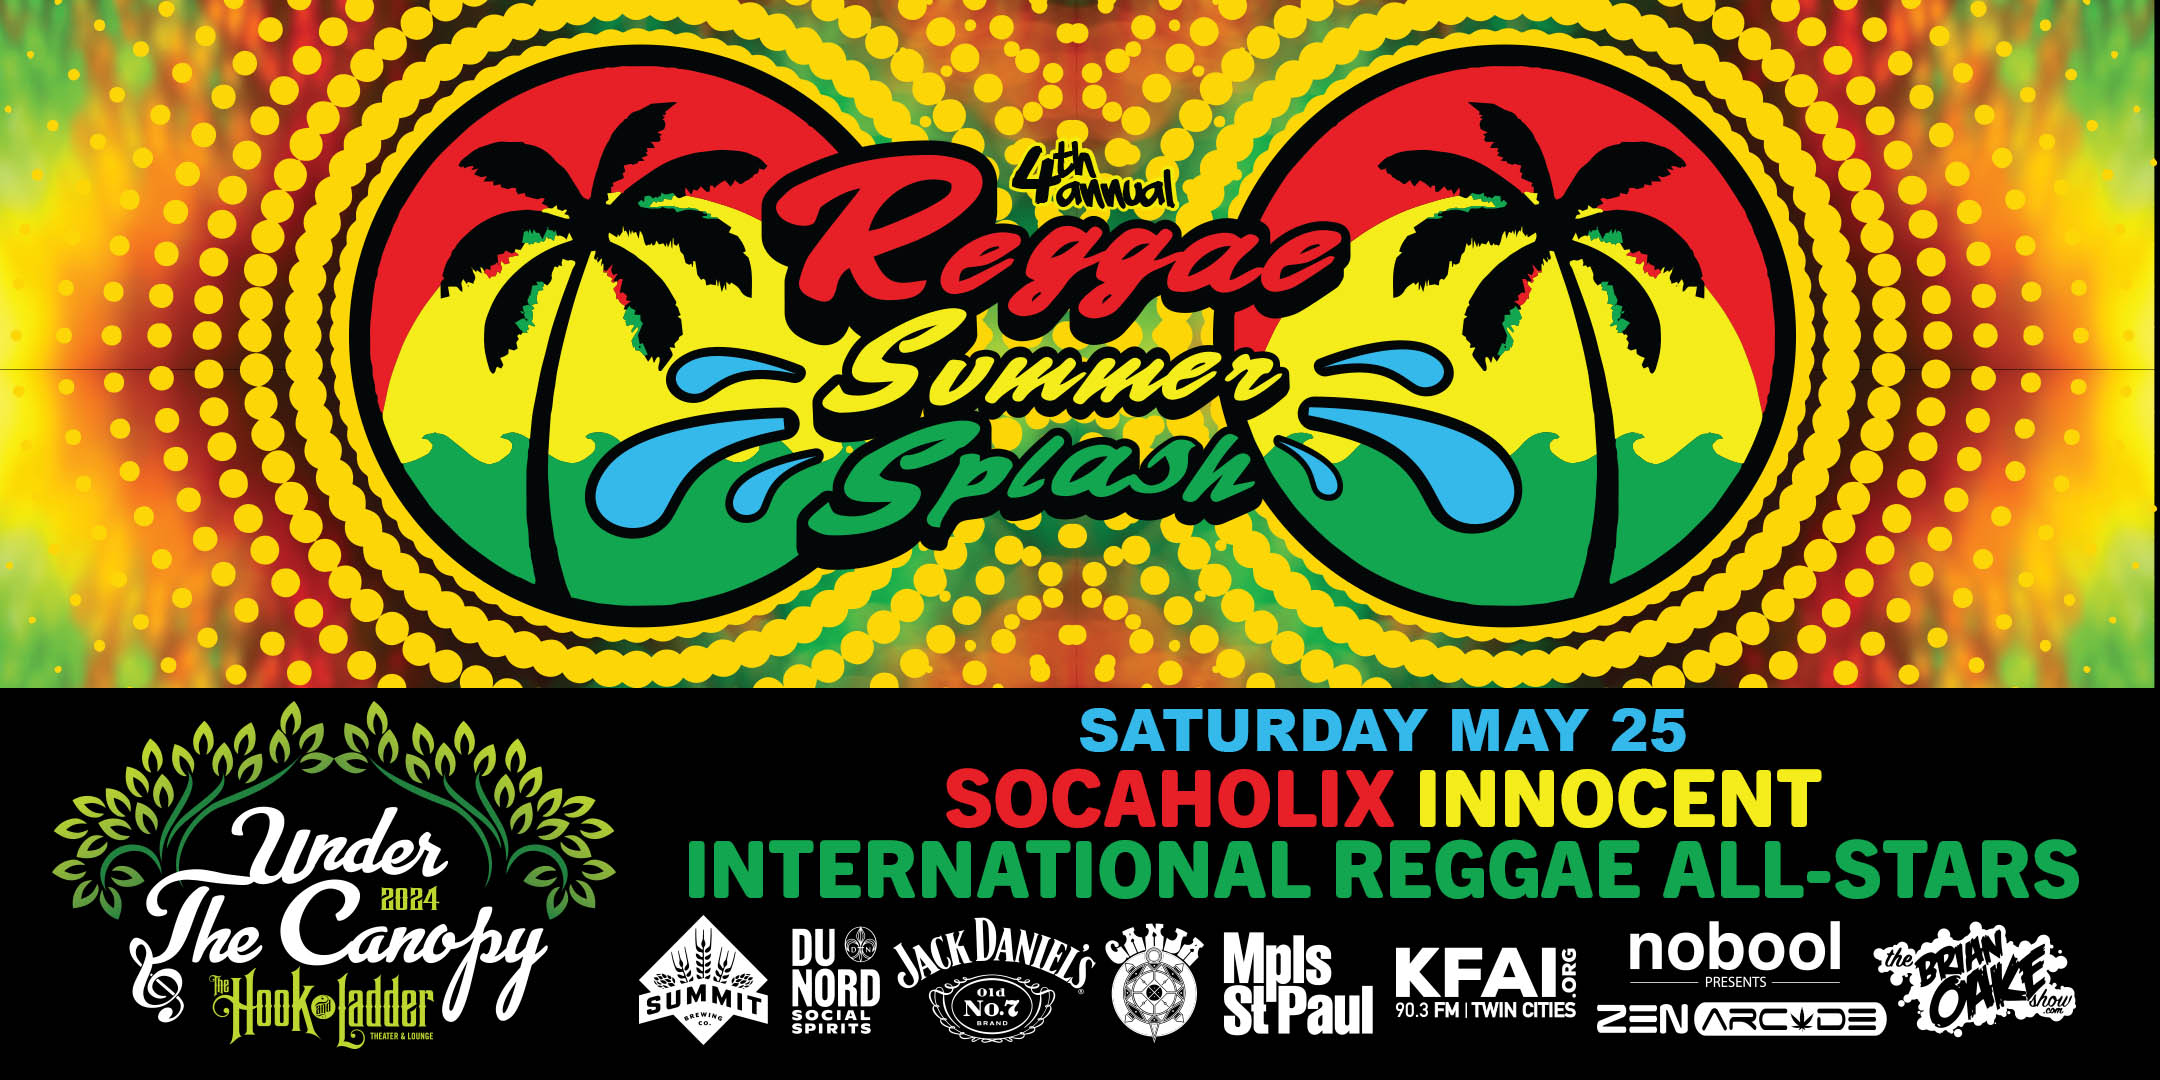 4th Annual Reggae Summer Splash with Socaholix / Innocent / International Reggae All-Stars Saturday, May 25, 2024 Under The Canopy at The Hook and Ladder Theater "An Urban Outdoor Summer Concert Series" Doors 6:00pm :: Music 7:00pm :: 21+ GA: $18 ADV / $25 DOS